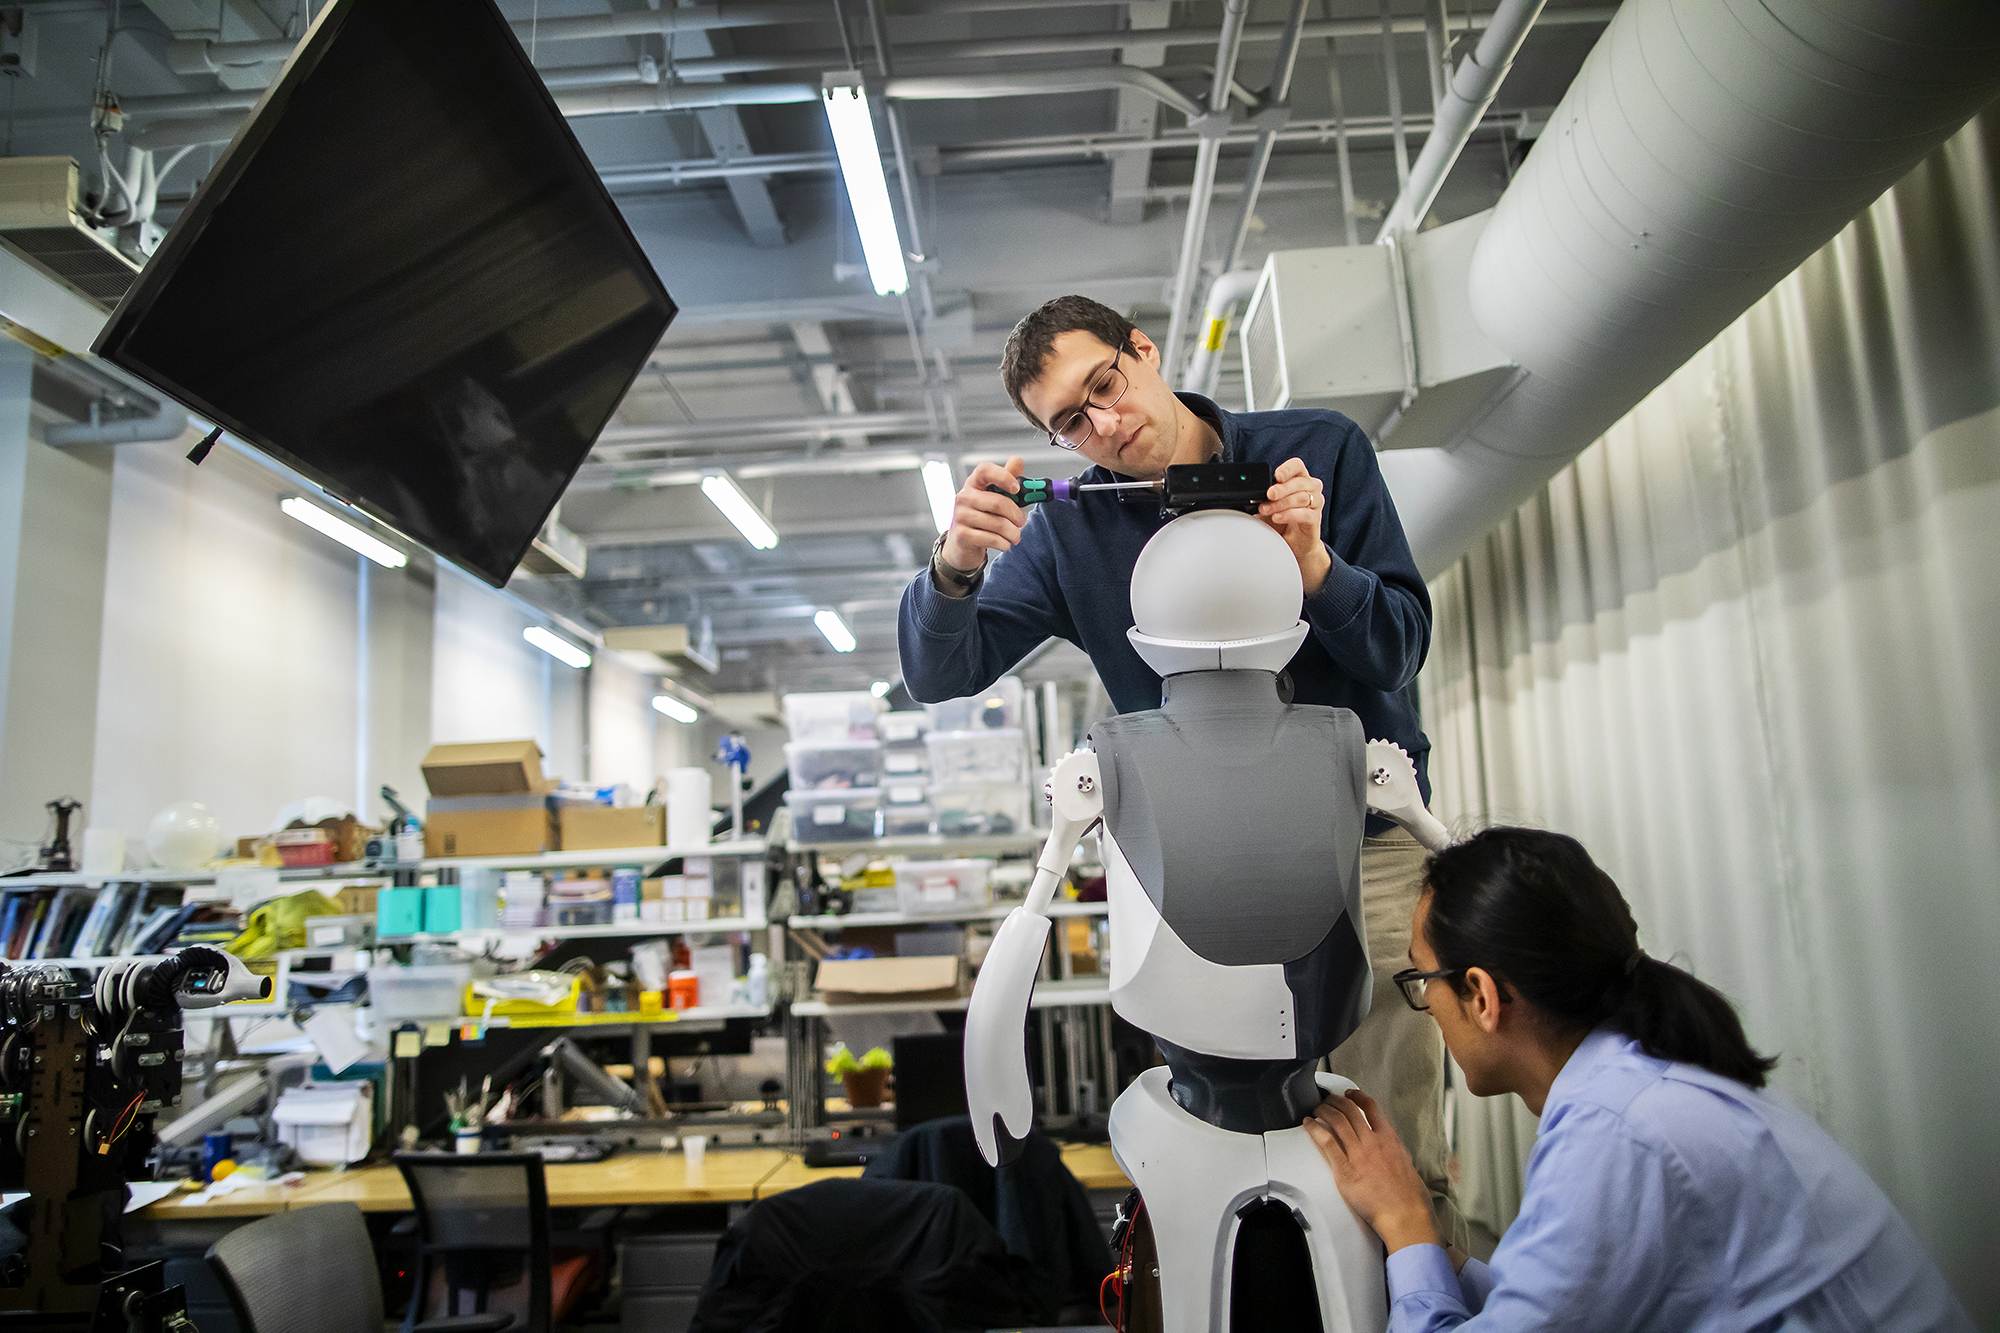 Two people work on Quori the Robot at Pennovation Center.